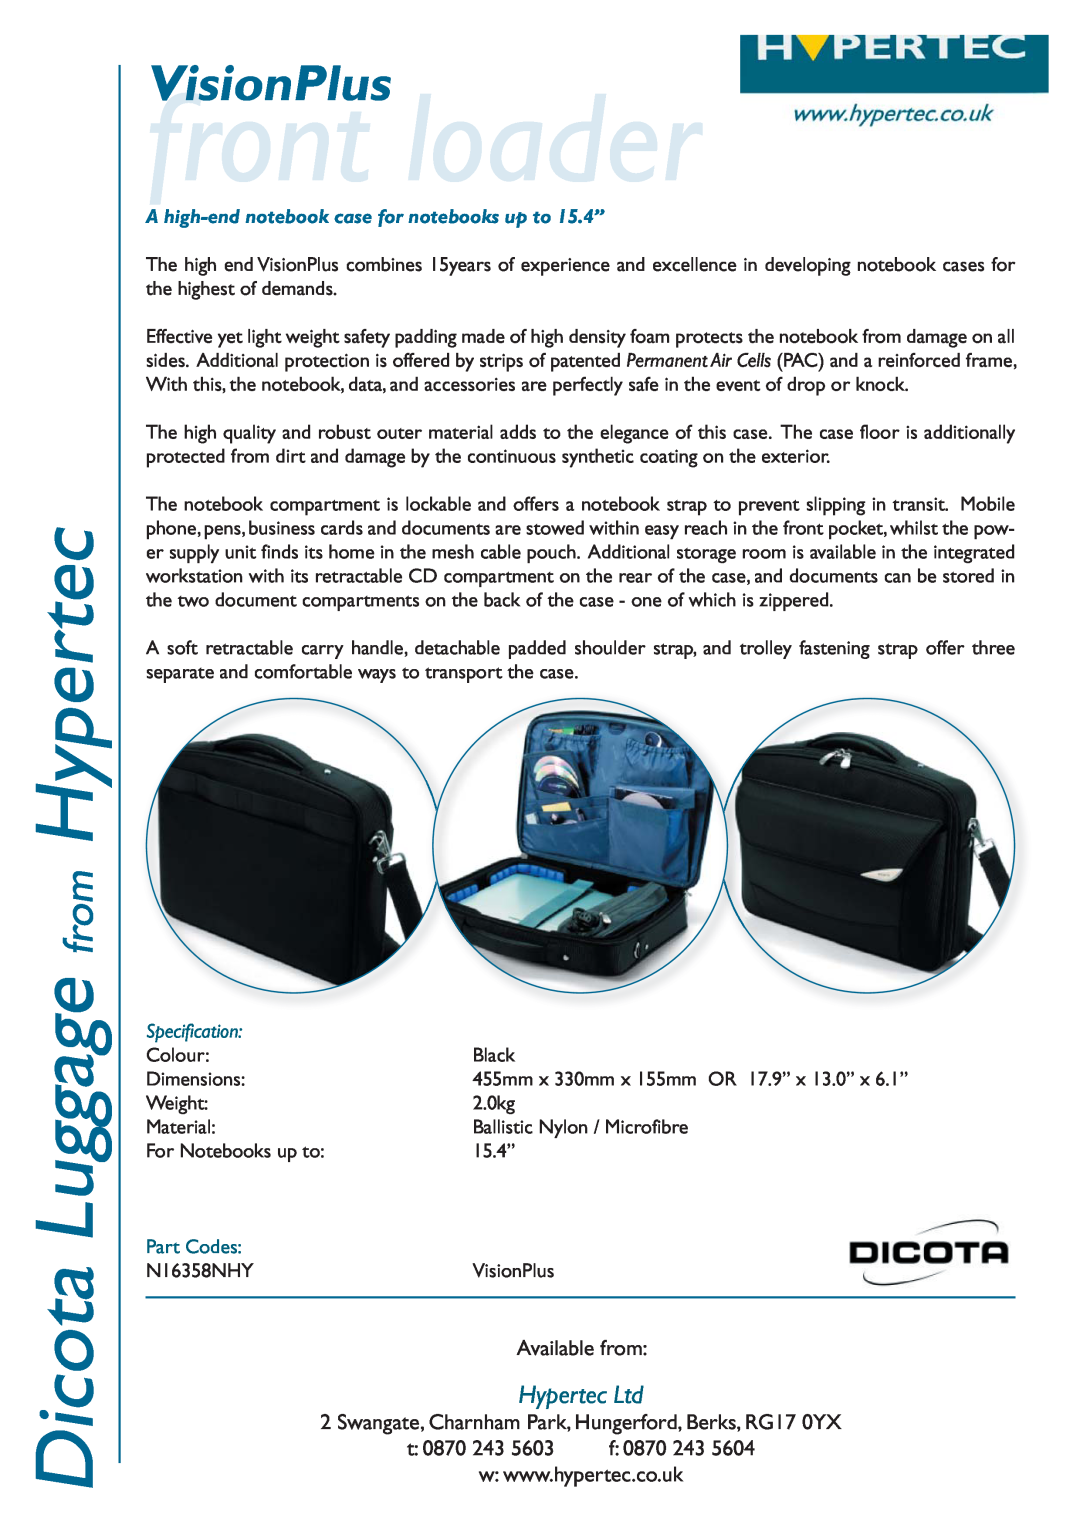 Hypertec N16358NHY dimensions front loader, Dicota Luggage from Hypertec, VisionPlus, Available from, t 0870 243 